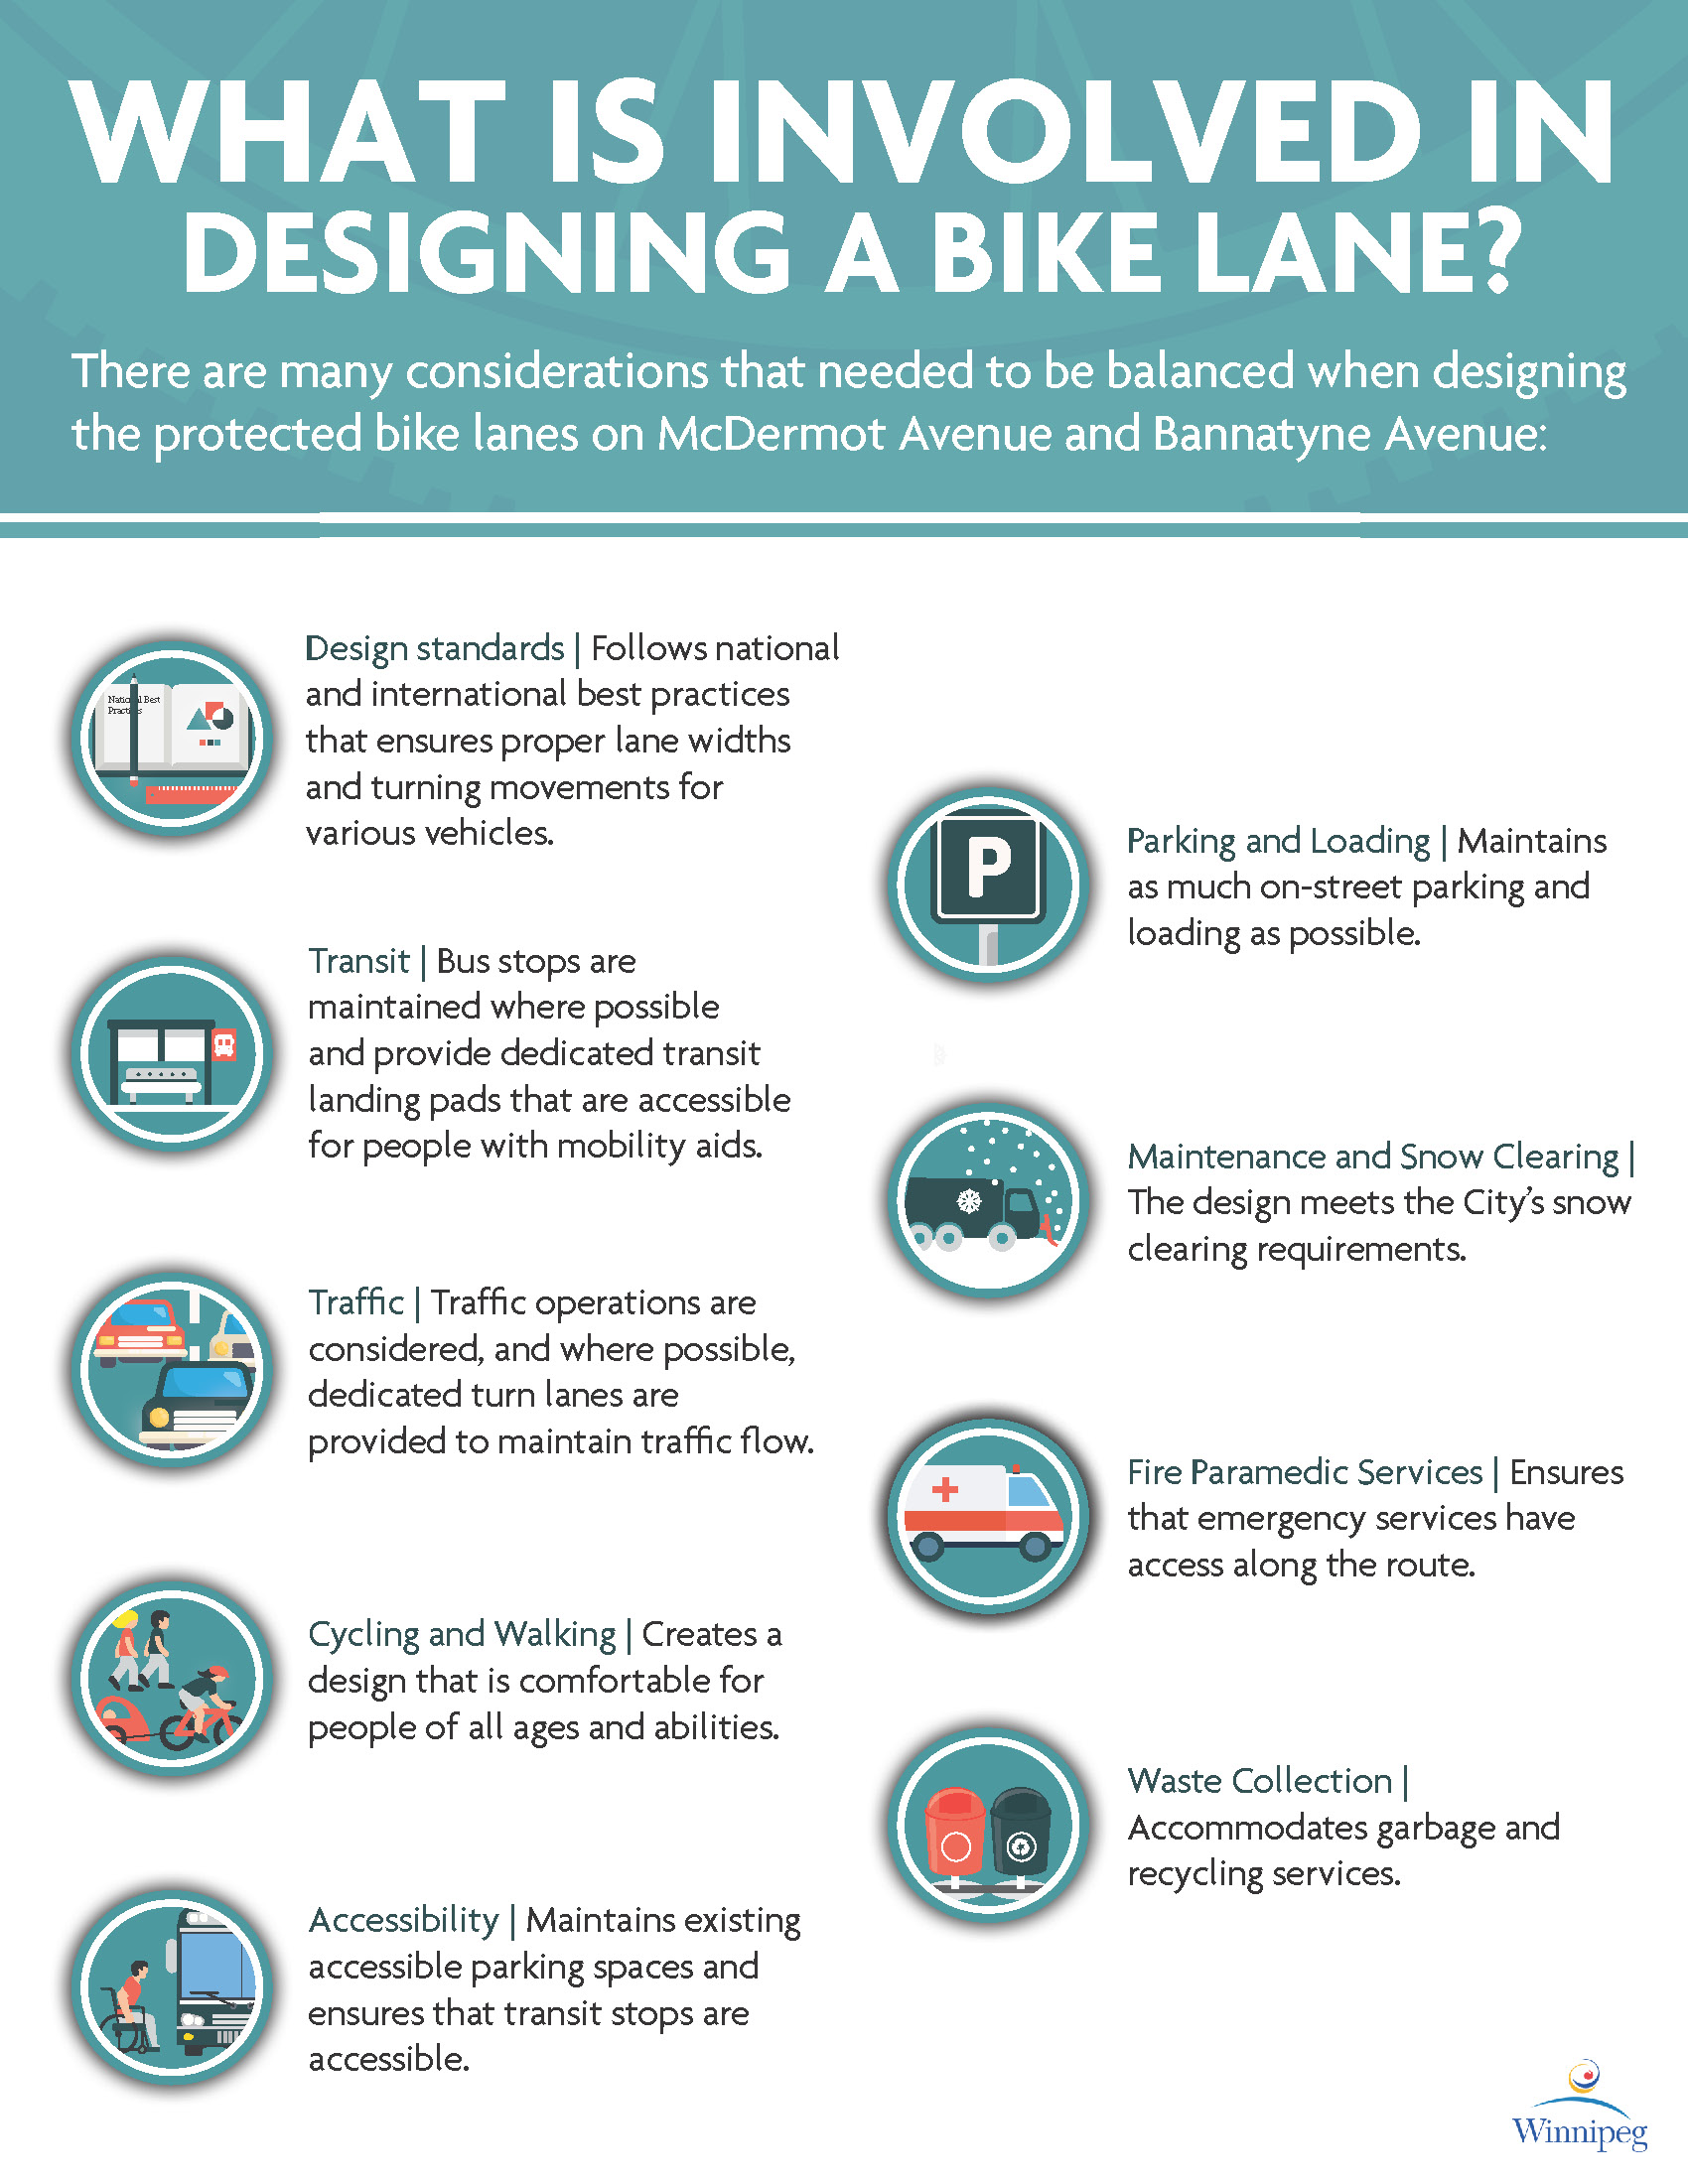 What is involved in designing a bike lane